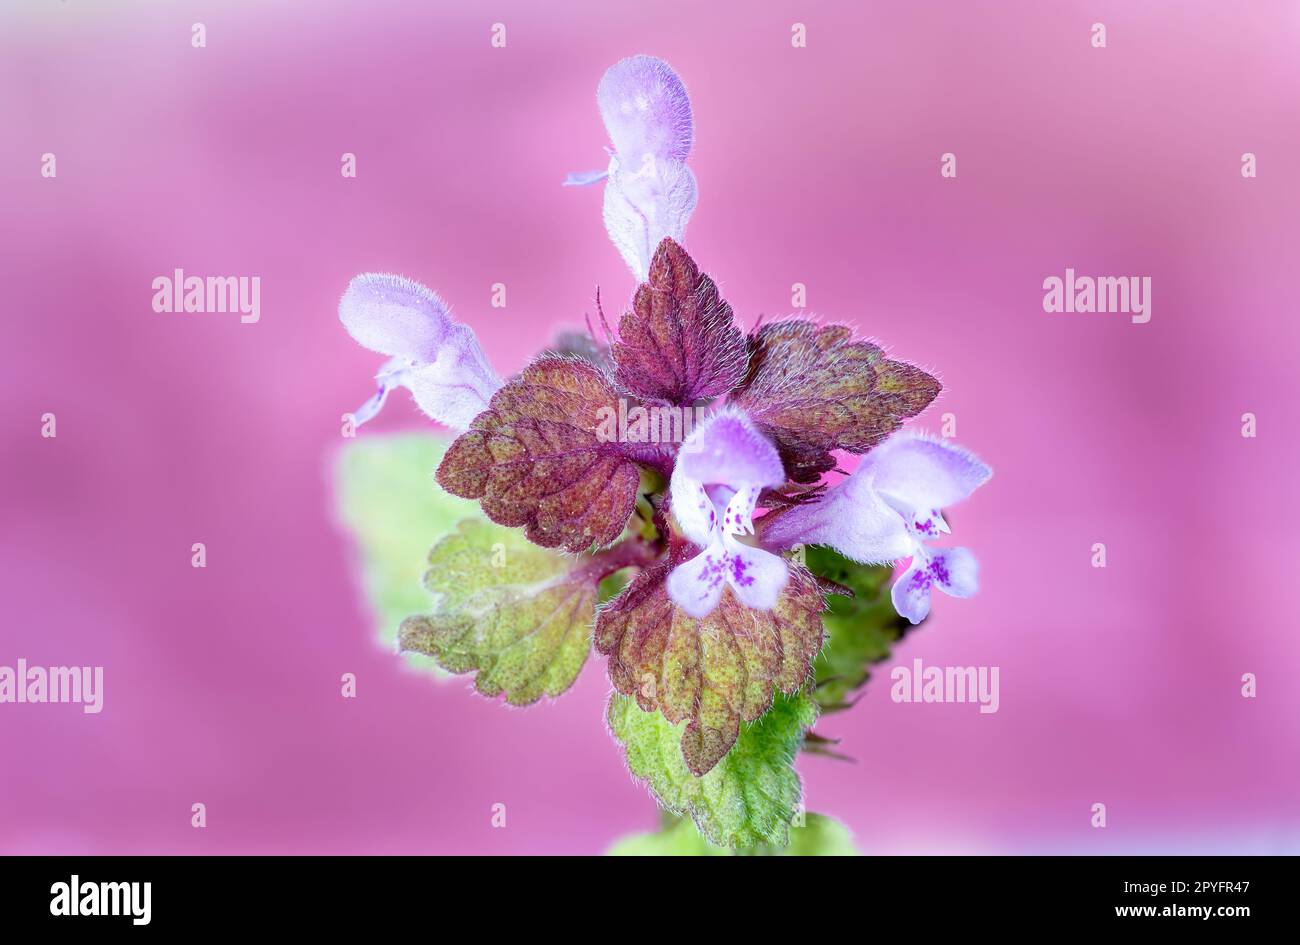 Macro photography of Lamium purpureum with a pink background Stock Photo